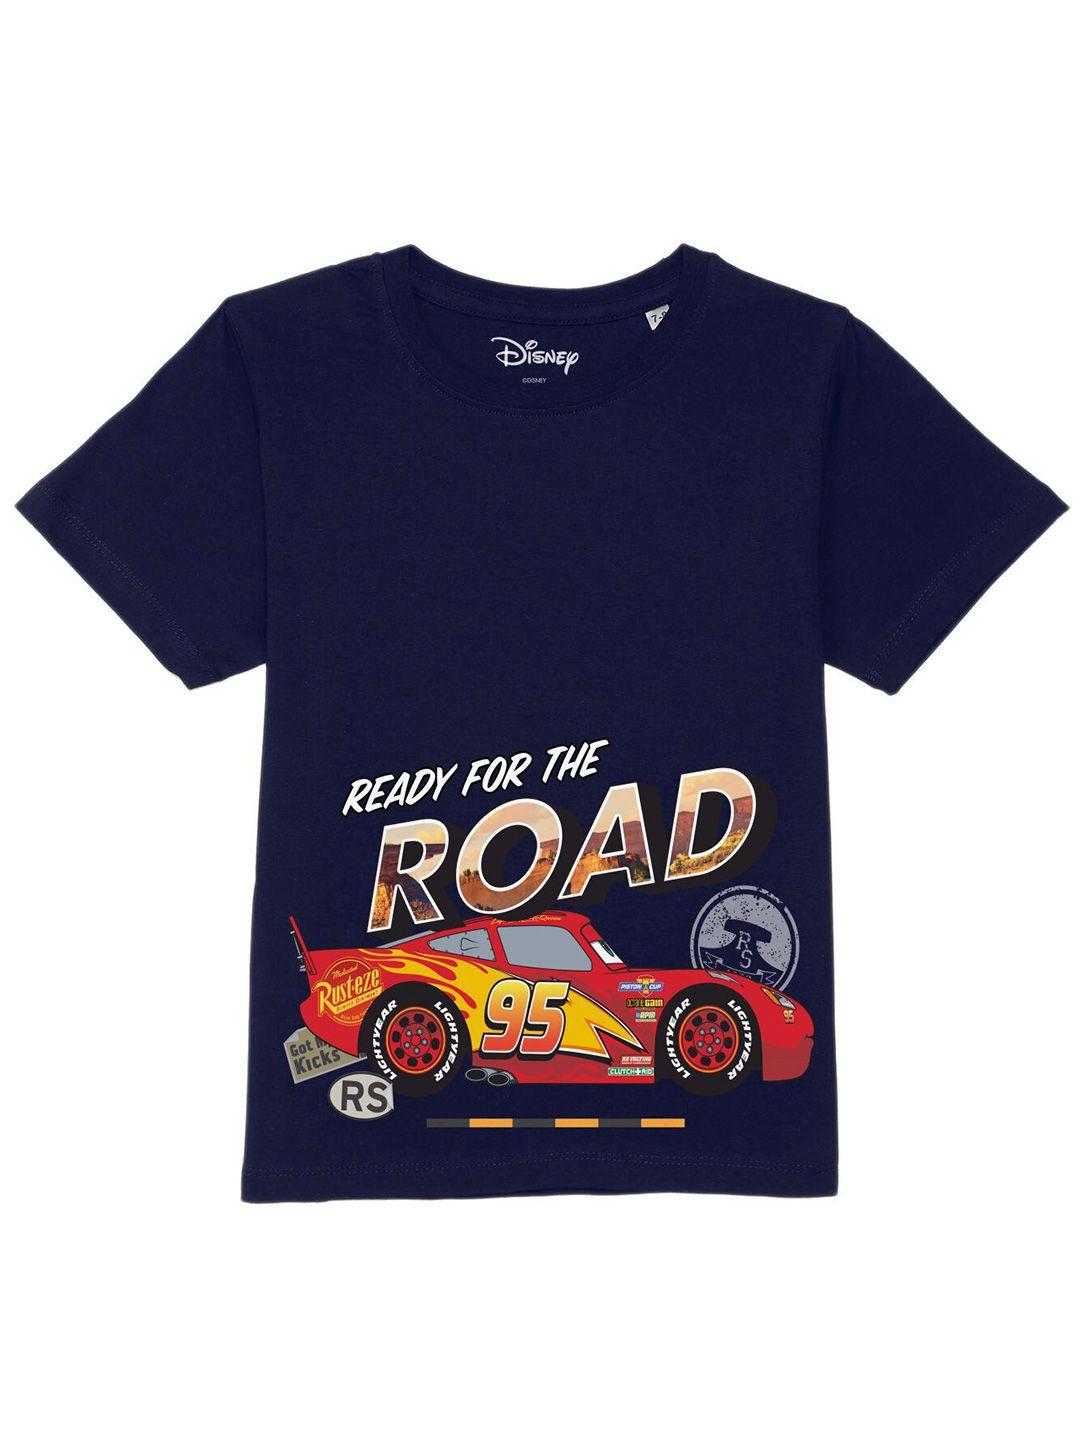 disney by wear your mind boys navy blue graphic printed cotton t-shirt